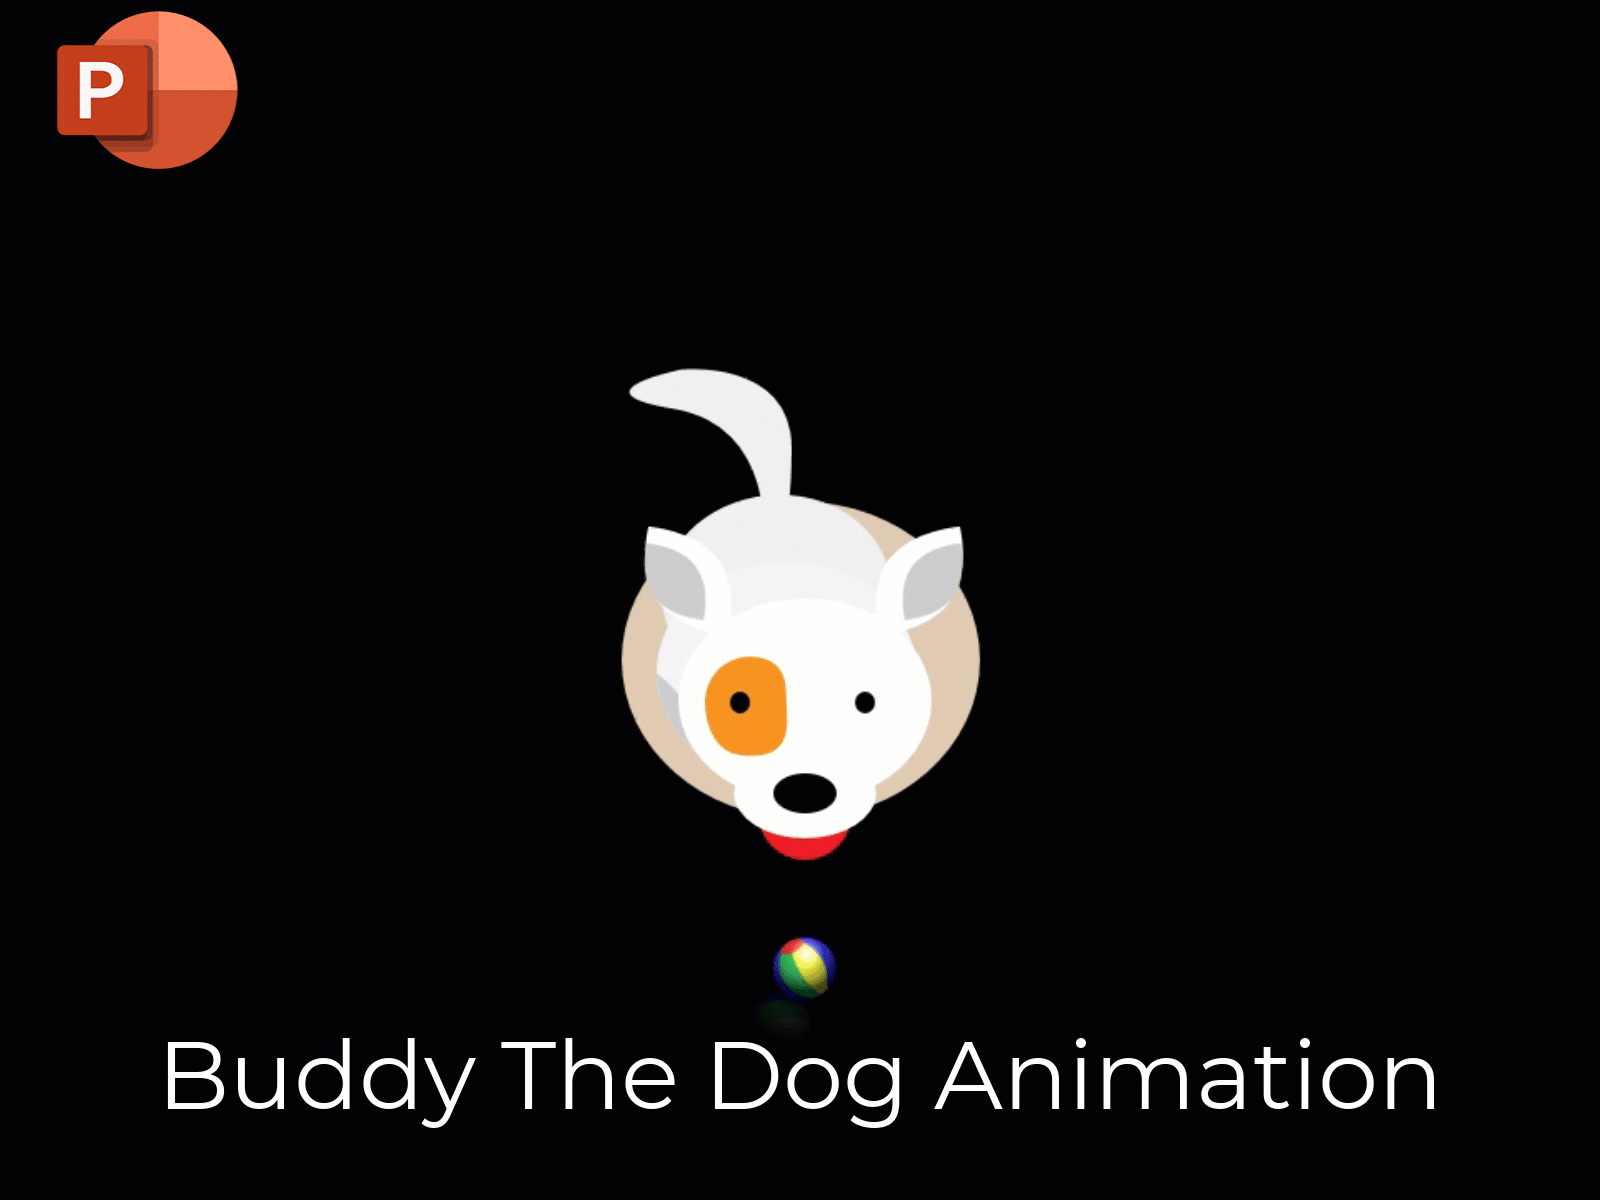 Buddy The Dog Animation in PowerPoint animation in powerpoint animation powerpoint motion graphics powerpoint powerpoint animation powerpoint presentation ppt animation